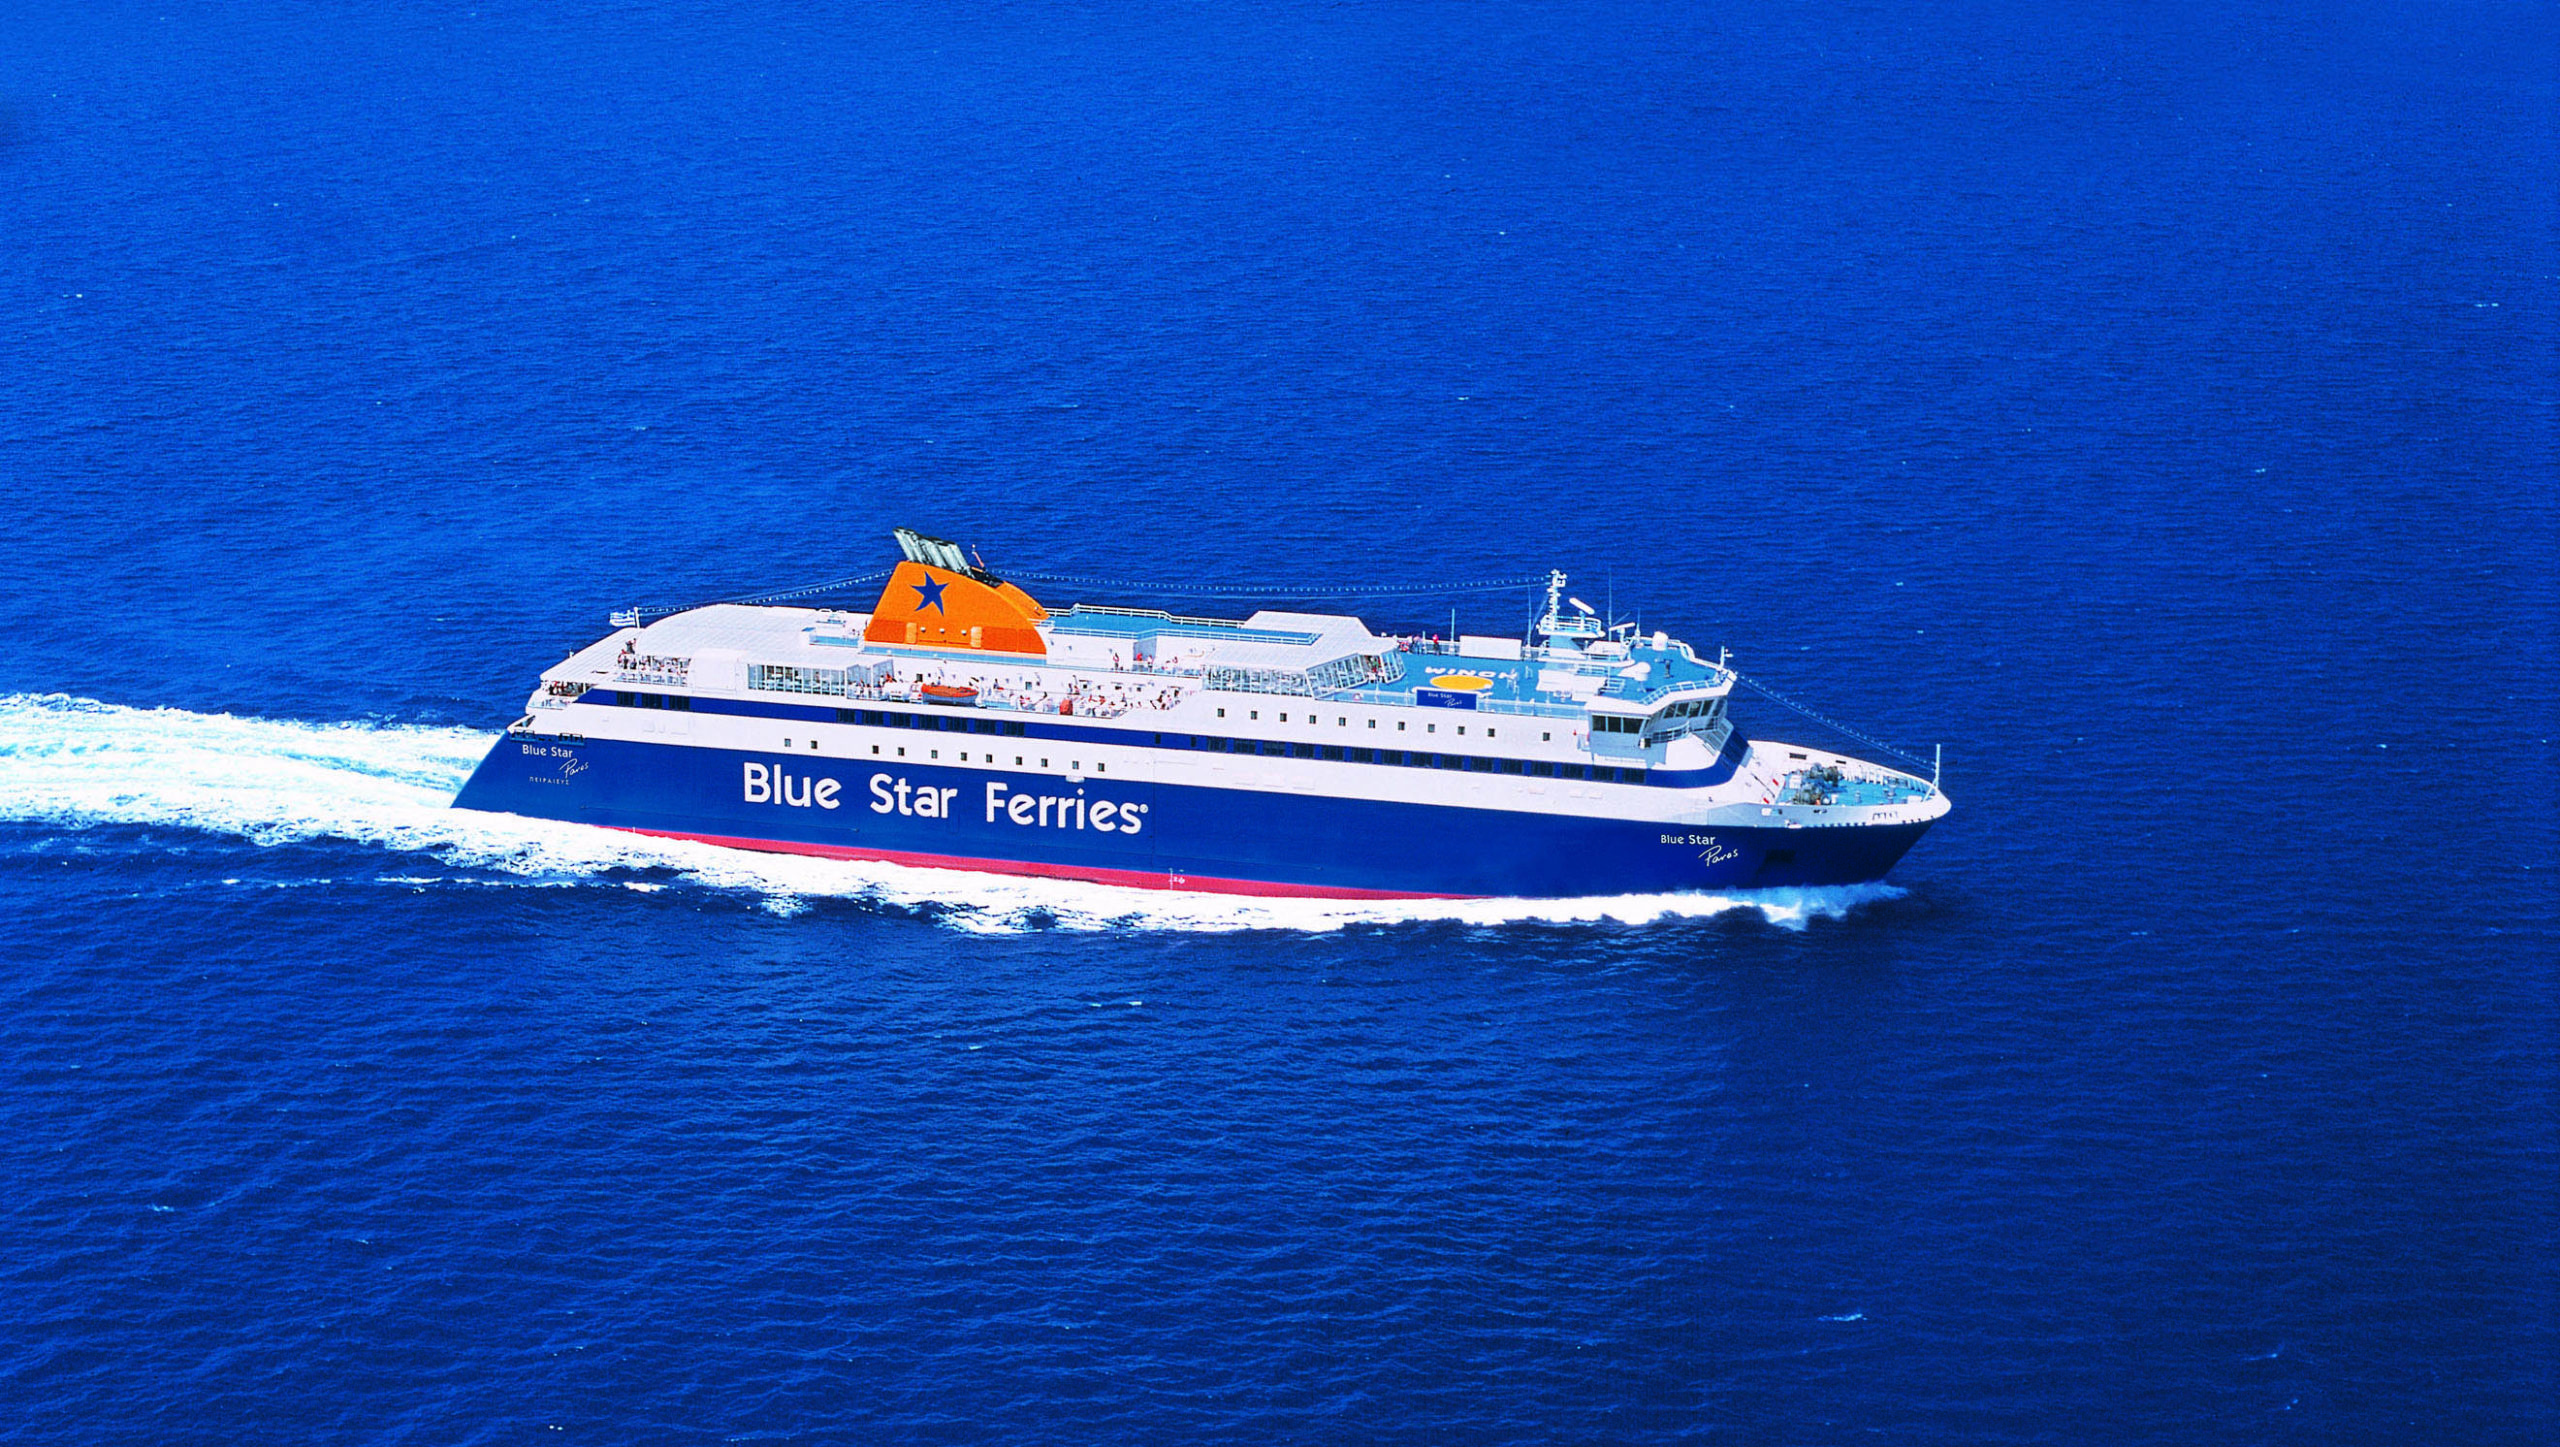 Ferry: Blue Star Ships, A vessel for transporting passengers. 2560x1450 HD Wallpaper.